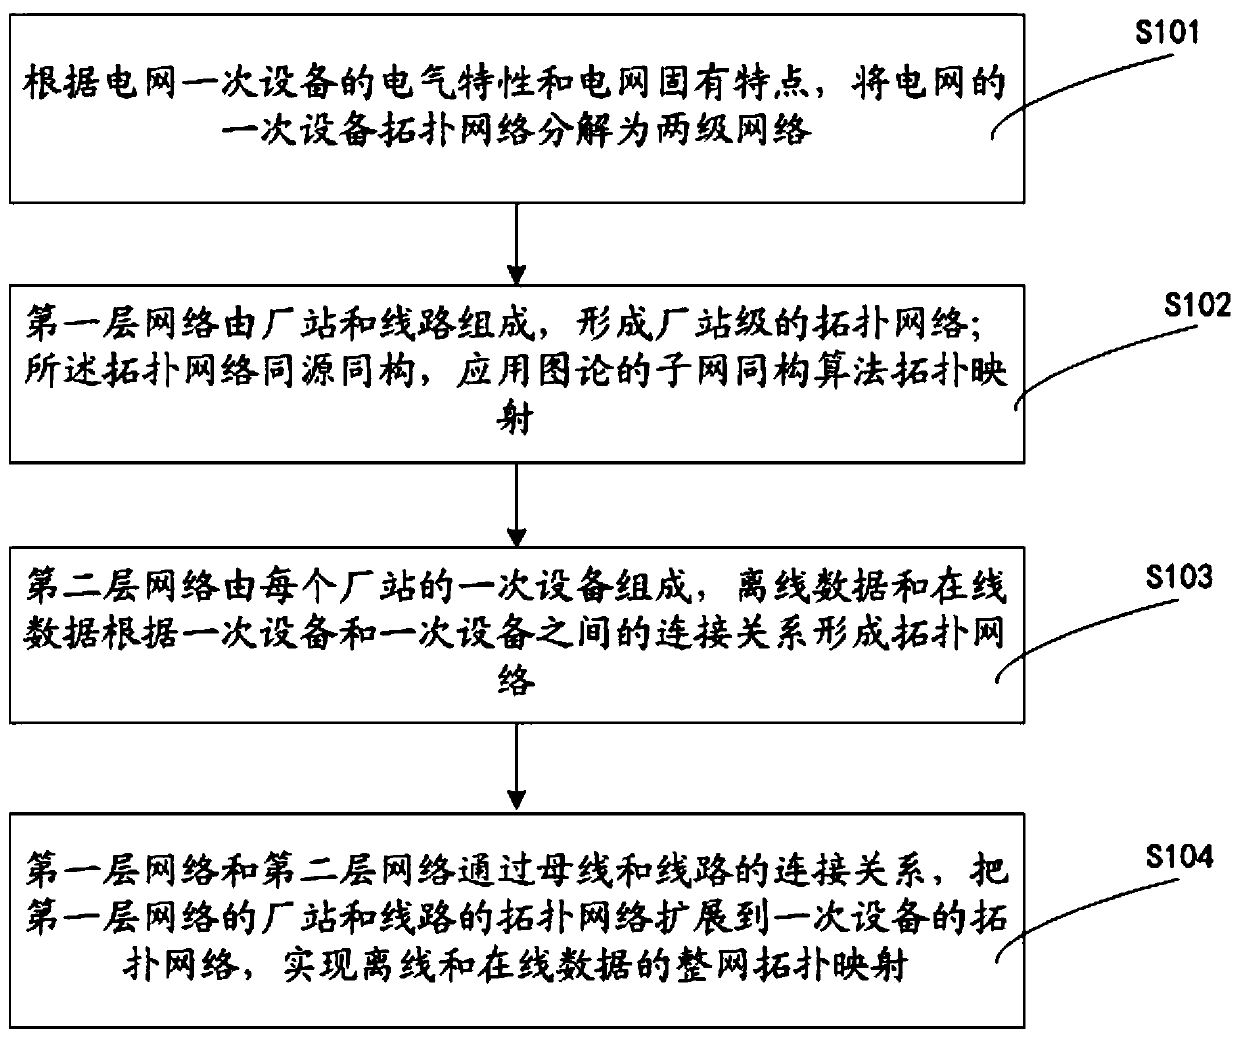 Heterogeneous grid structure topology mapping method for offline and online data of power grid